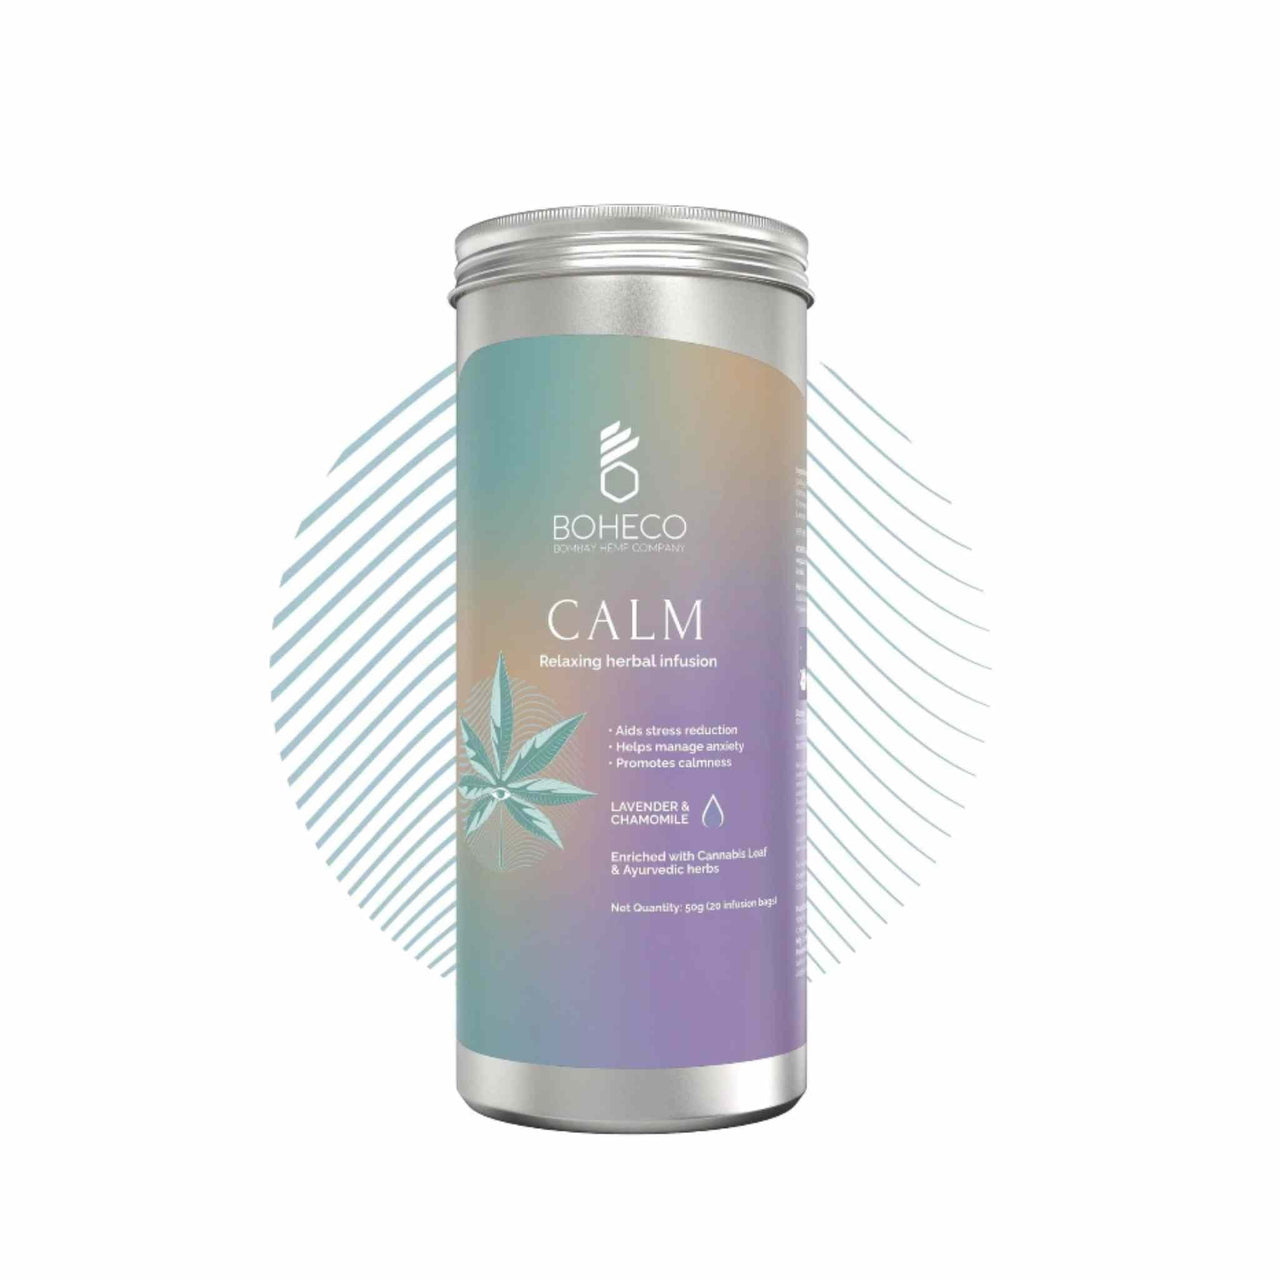 Boheco Calm - Relaxing Herbal Infusion Bags - CBD Store India